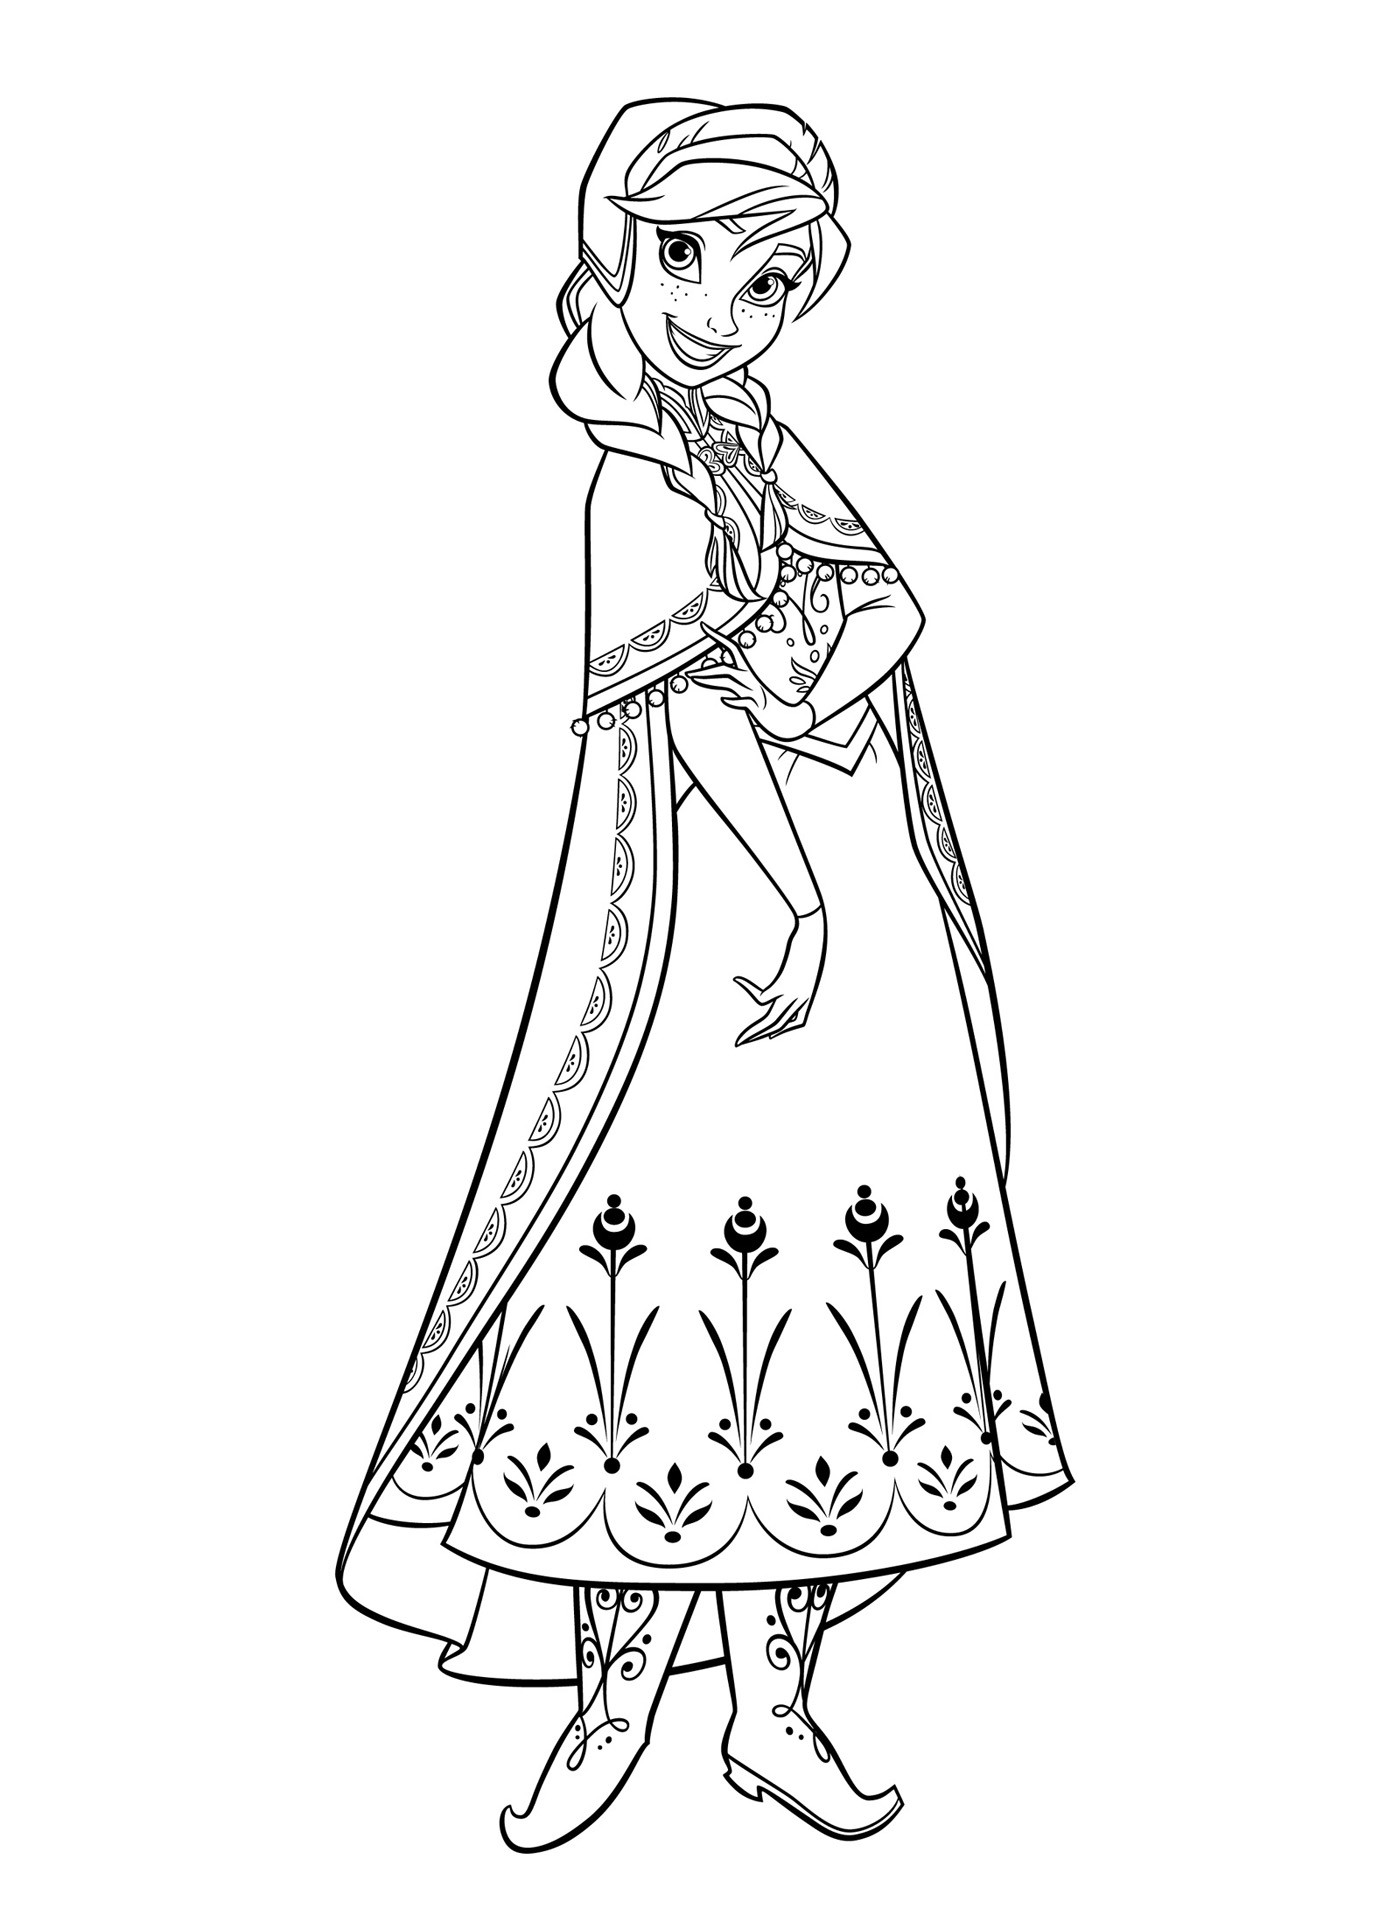 Princess Anna Coloring Pages
 princess anna coloring pages Download